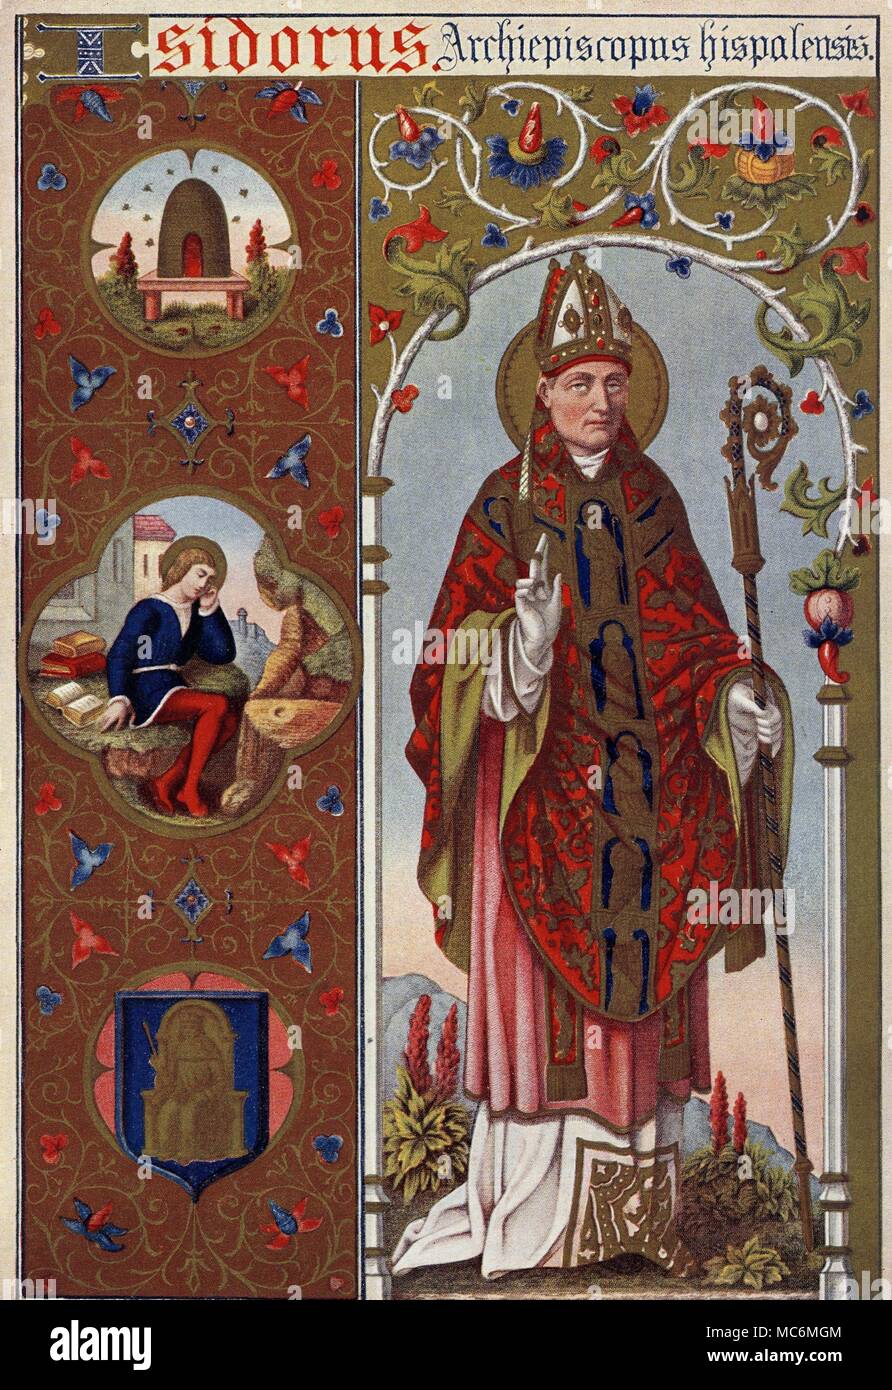 SAINTS - ISIDORE Saint Isidore, archbishop of Seville in the 6th century, was born in that city of a noble family. His main work in the community was involved with converting the Arians, and the organization of the church in Spain - including a network of cathedral schools. Process print, from Alban Butler's The Lives of The Fathers, Martyrs and Other Principles Saints, edition of circa 1928. Stock Photo